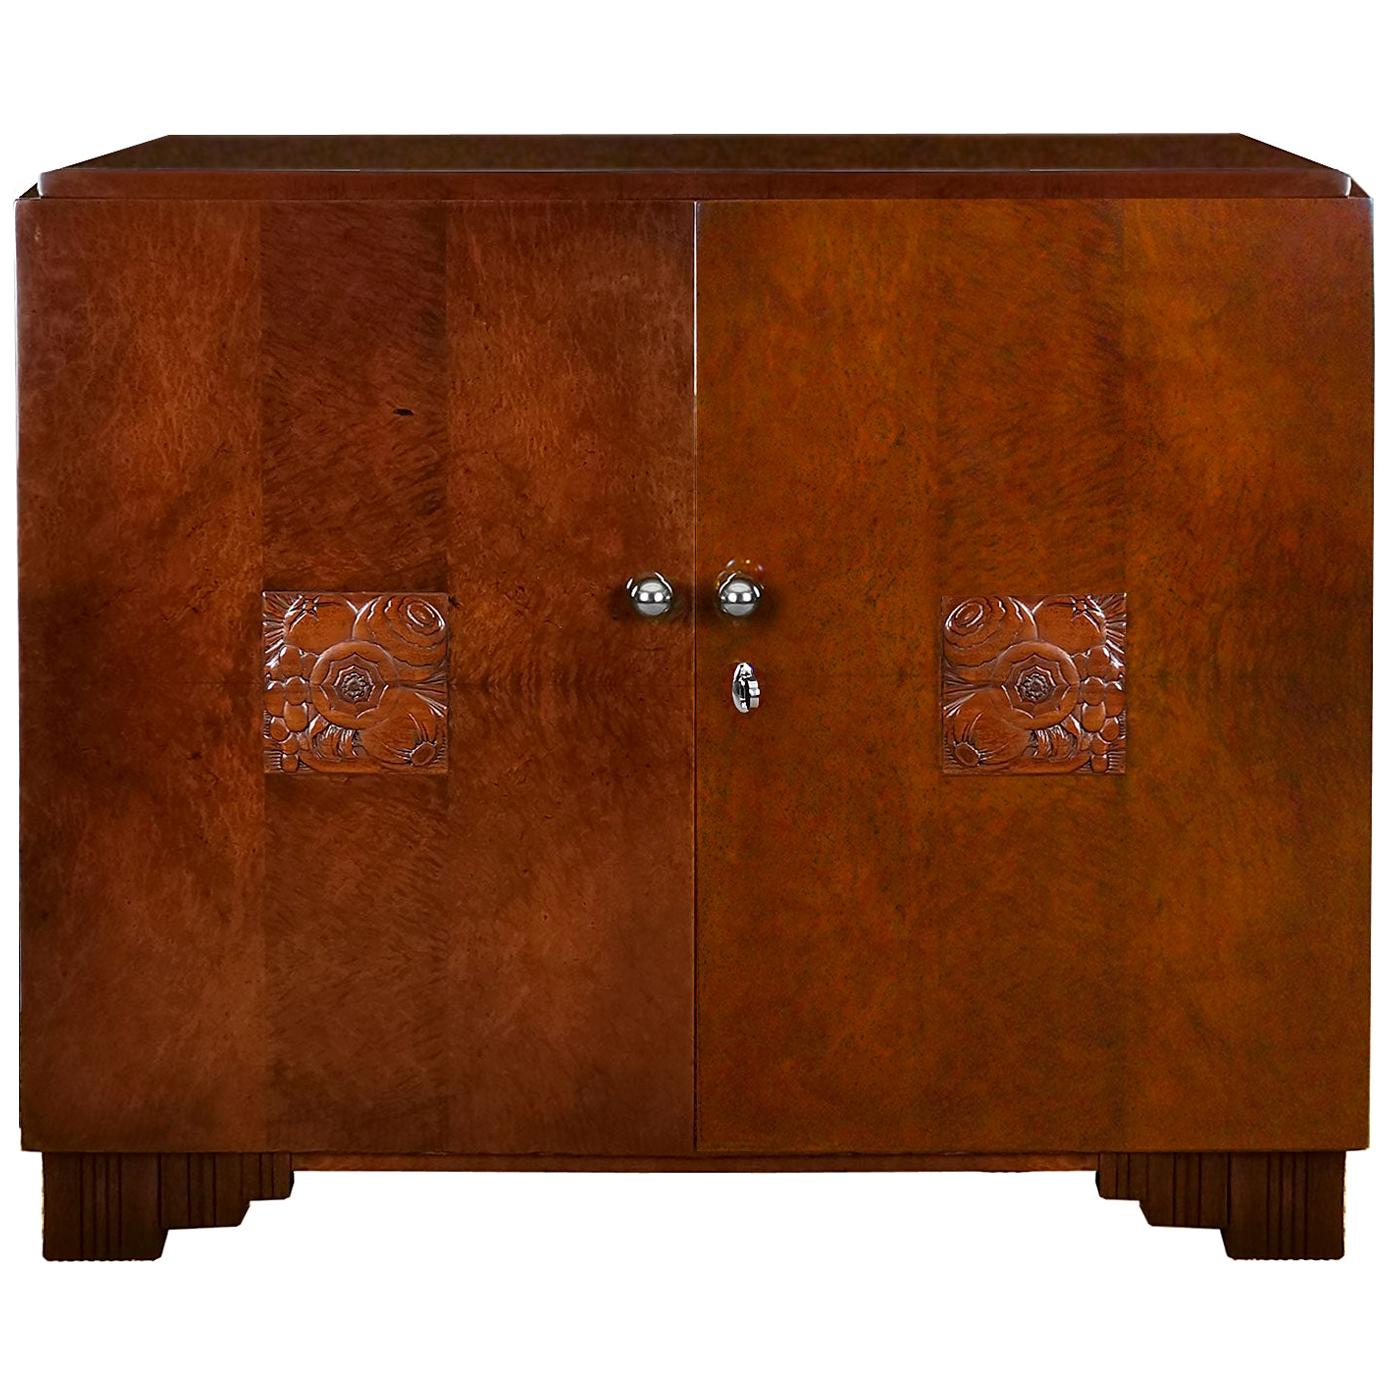 1925 Small Art Deco Sideboard, Two Doors, Mottled Mahogany, Brass, France